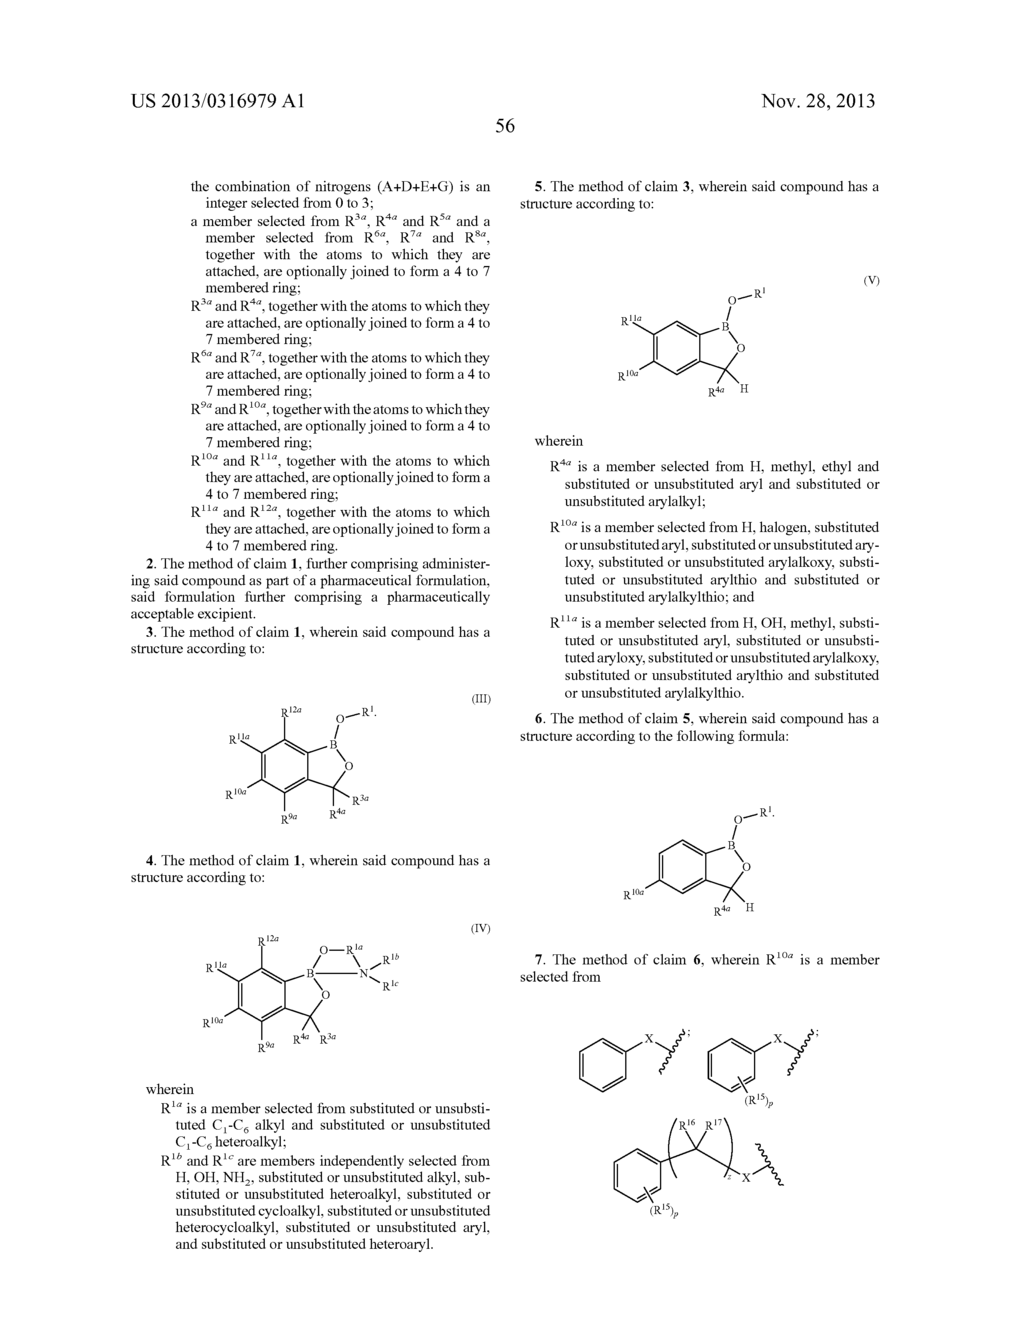 BORON-CONTAINING SMALL MOLECULES AS ANTI-INFLAMMATORY AGENTS - diagram, schematic, and image 78